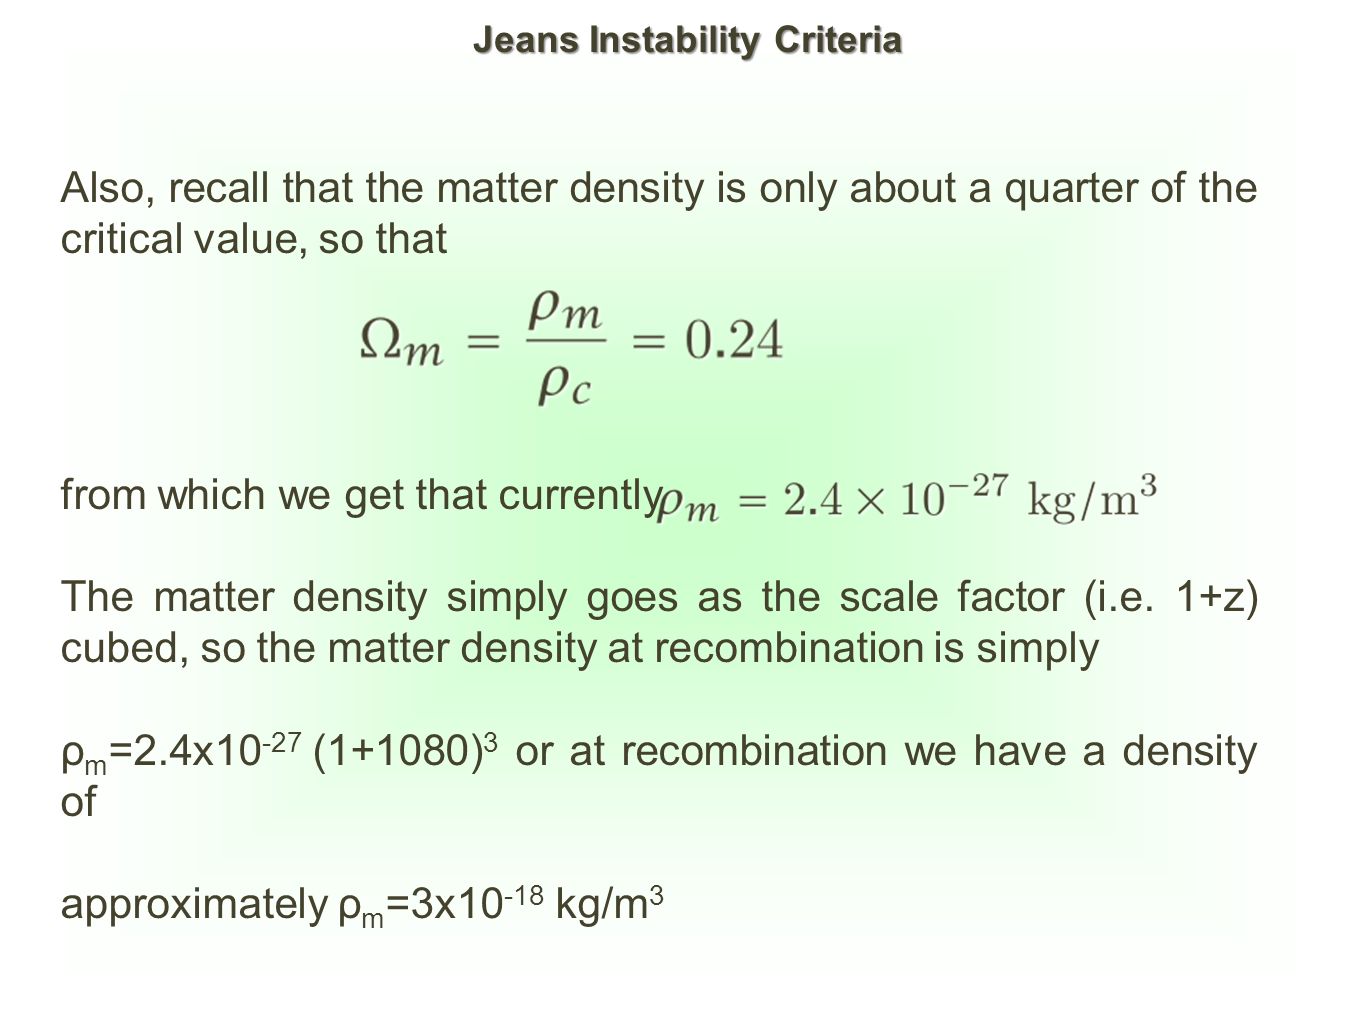 Jeans Instability Criterion The structures we see around us today and even  in the distant universe (galaxies, clusters of galaxies, etc.) must form  gravitationally. - ppt download